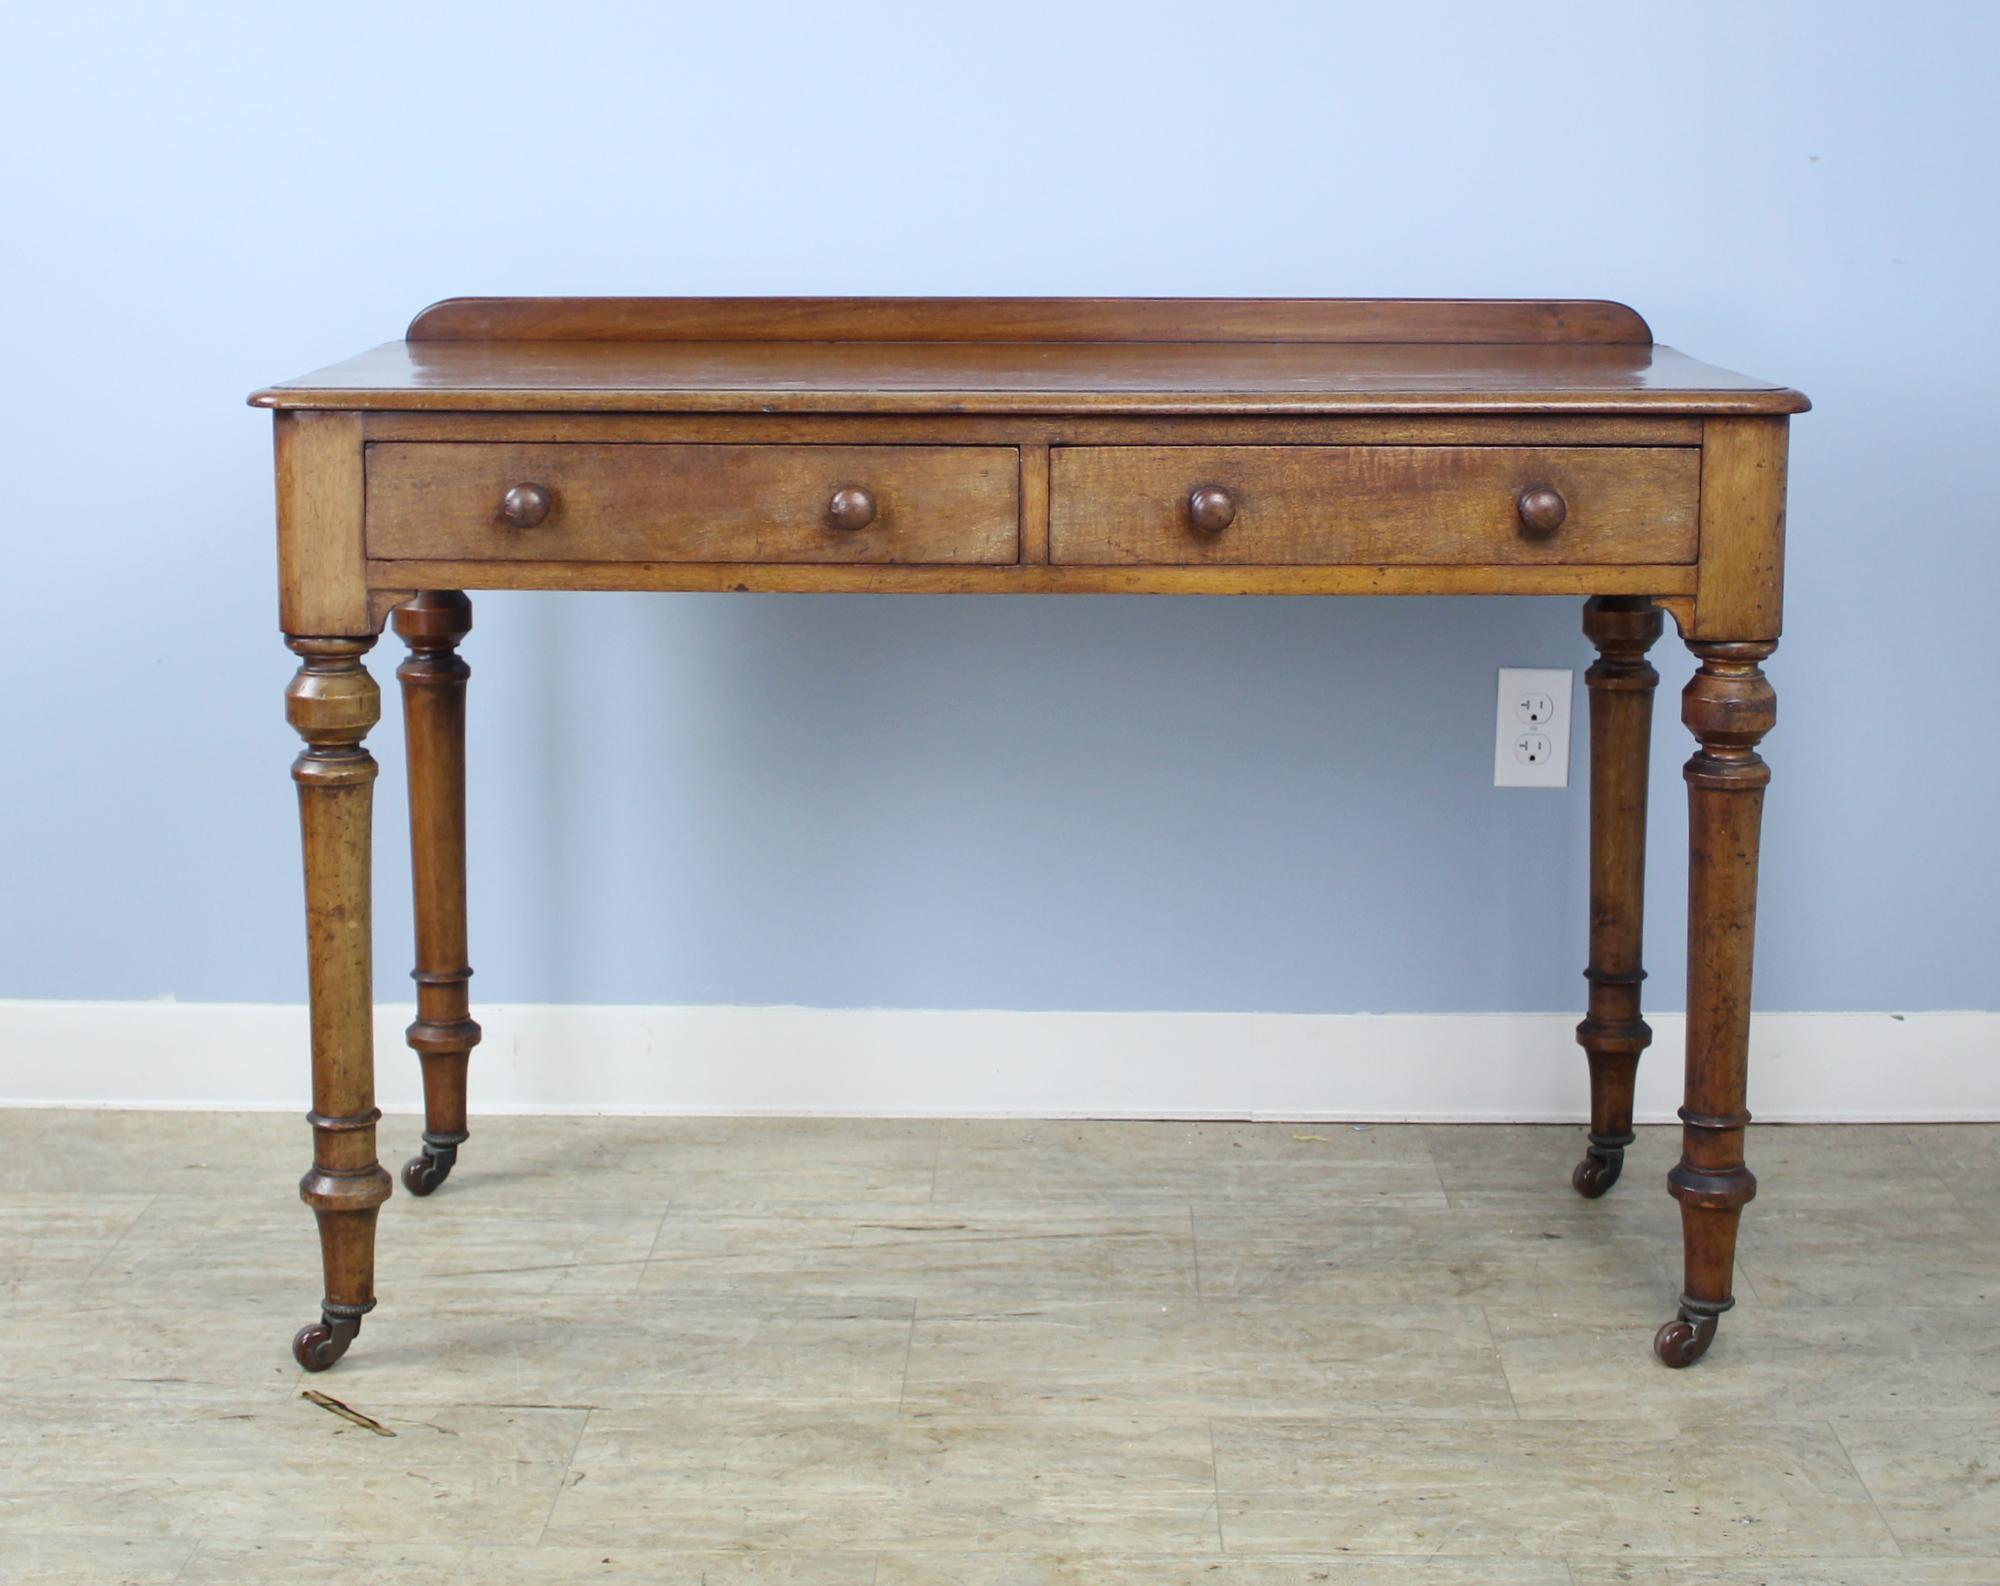 A handsome small desk with classic turned legs on original castors. Nice mellow color and good patina. Two roomy drawers and an apron height of 25 inches good for knees. Galleried back adds period charm. Note: the two knobs on the right drawer are